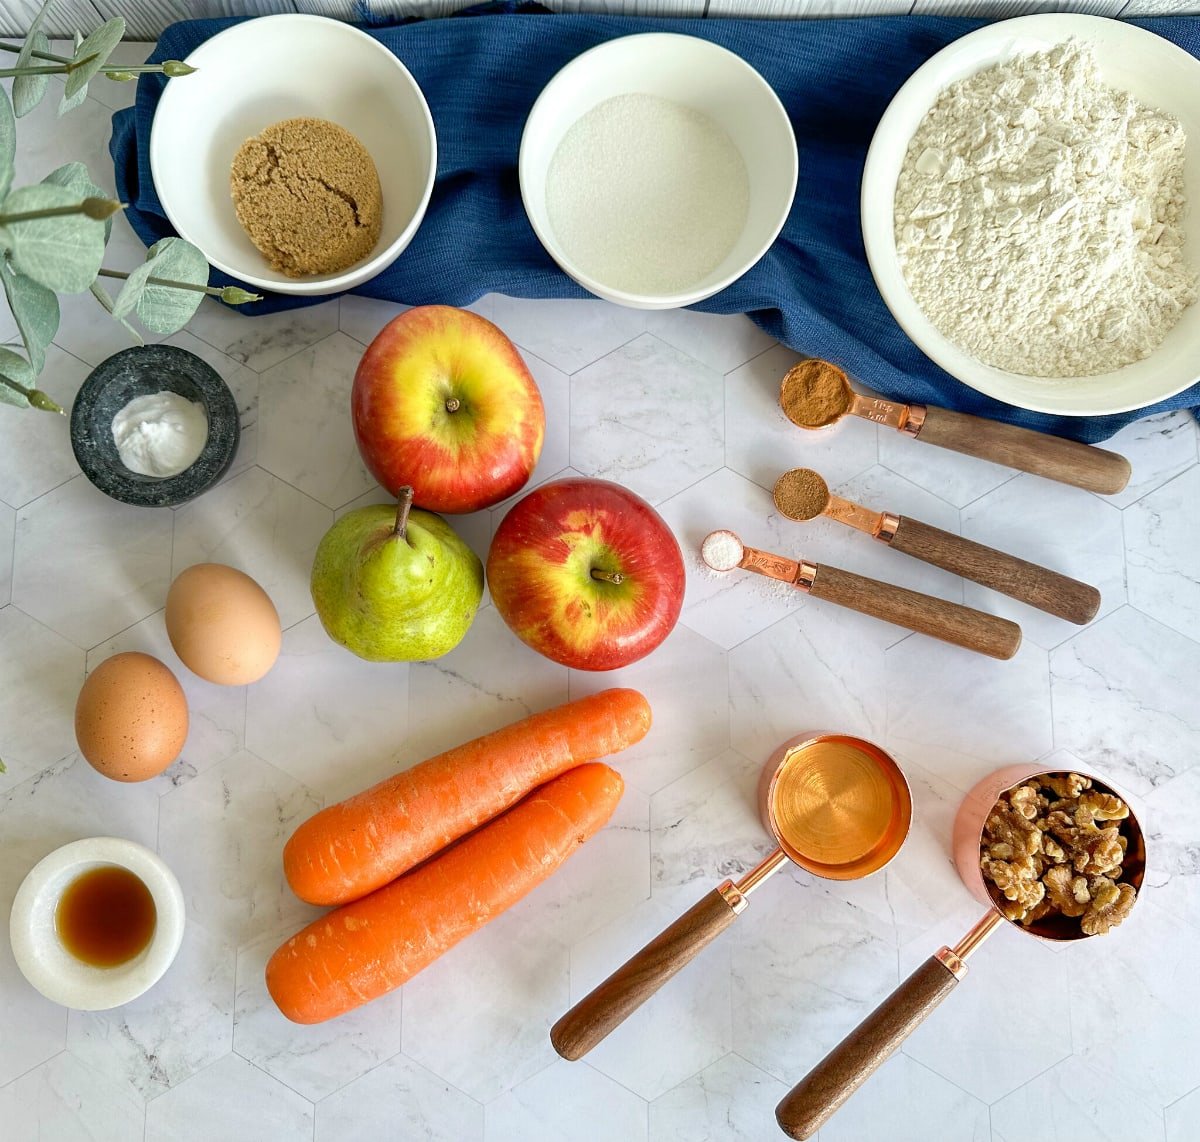 Ingredients used to make Apple Pear and Carrot Loaf, see recipe card for details